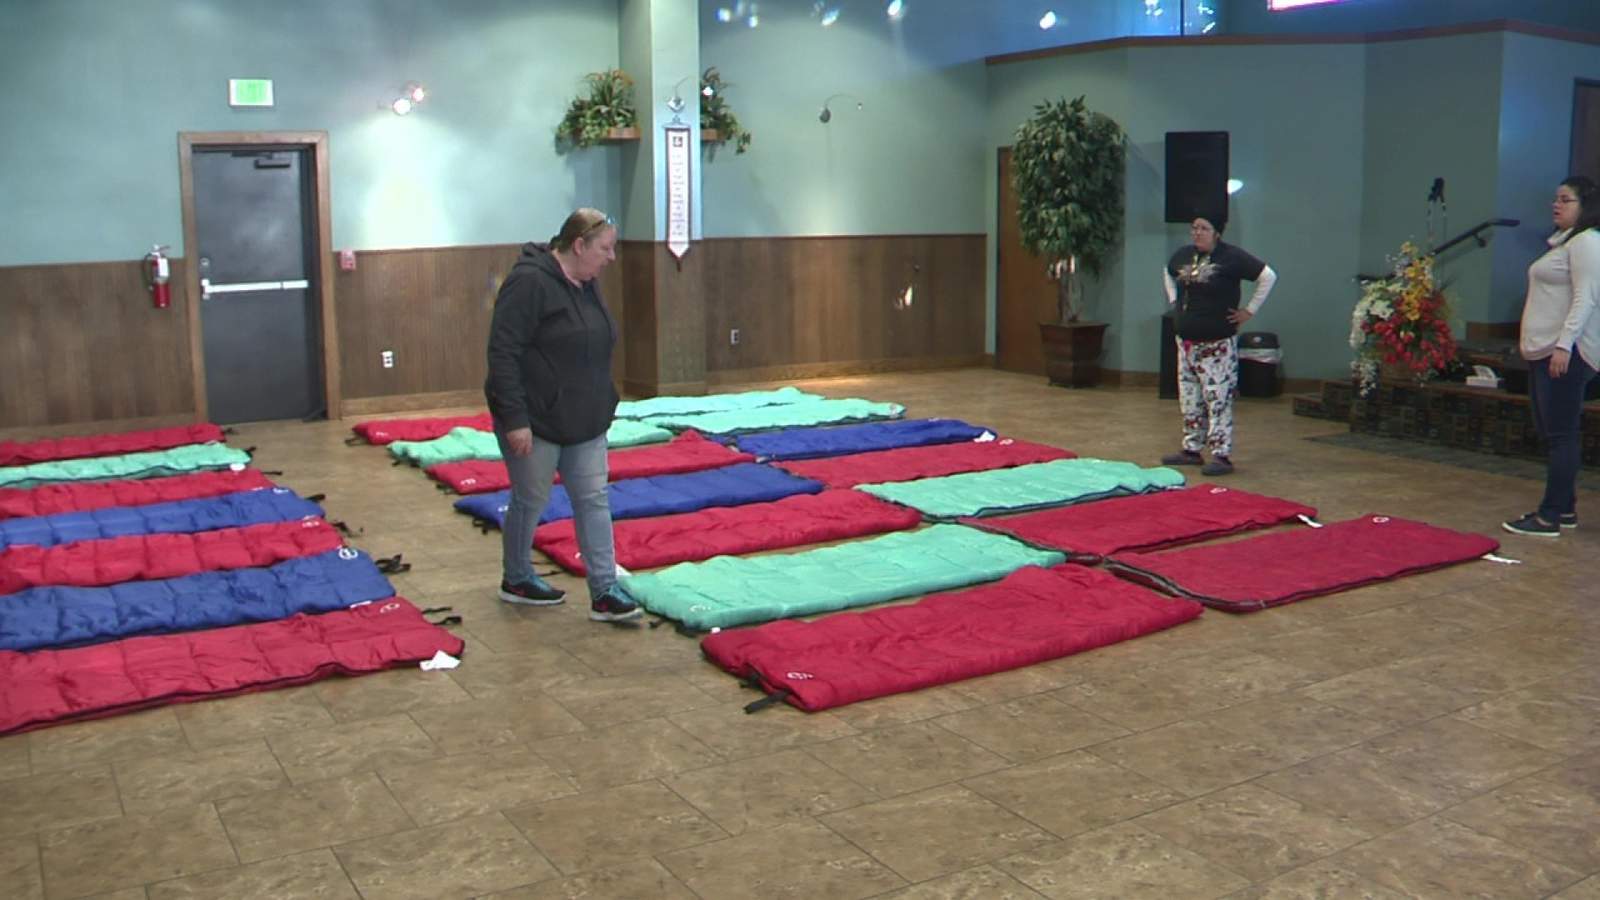 Church provides homeless a place to sleep to escape freezing temperatures